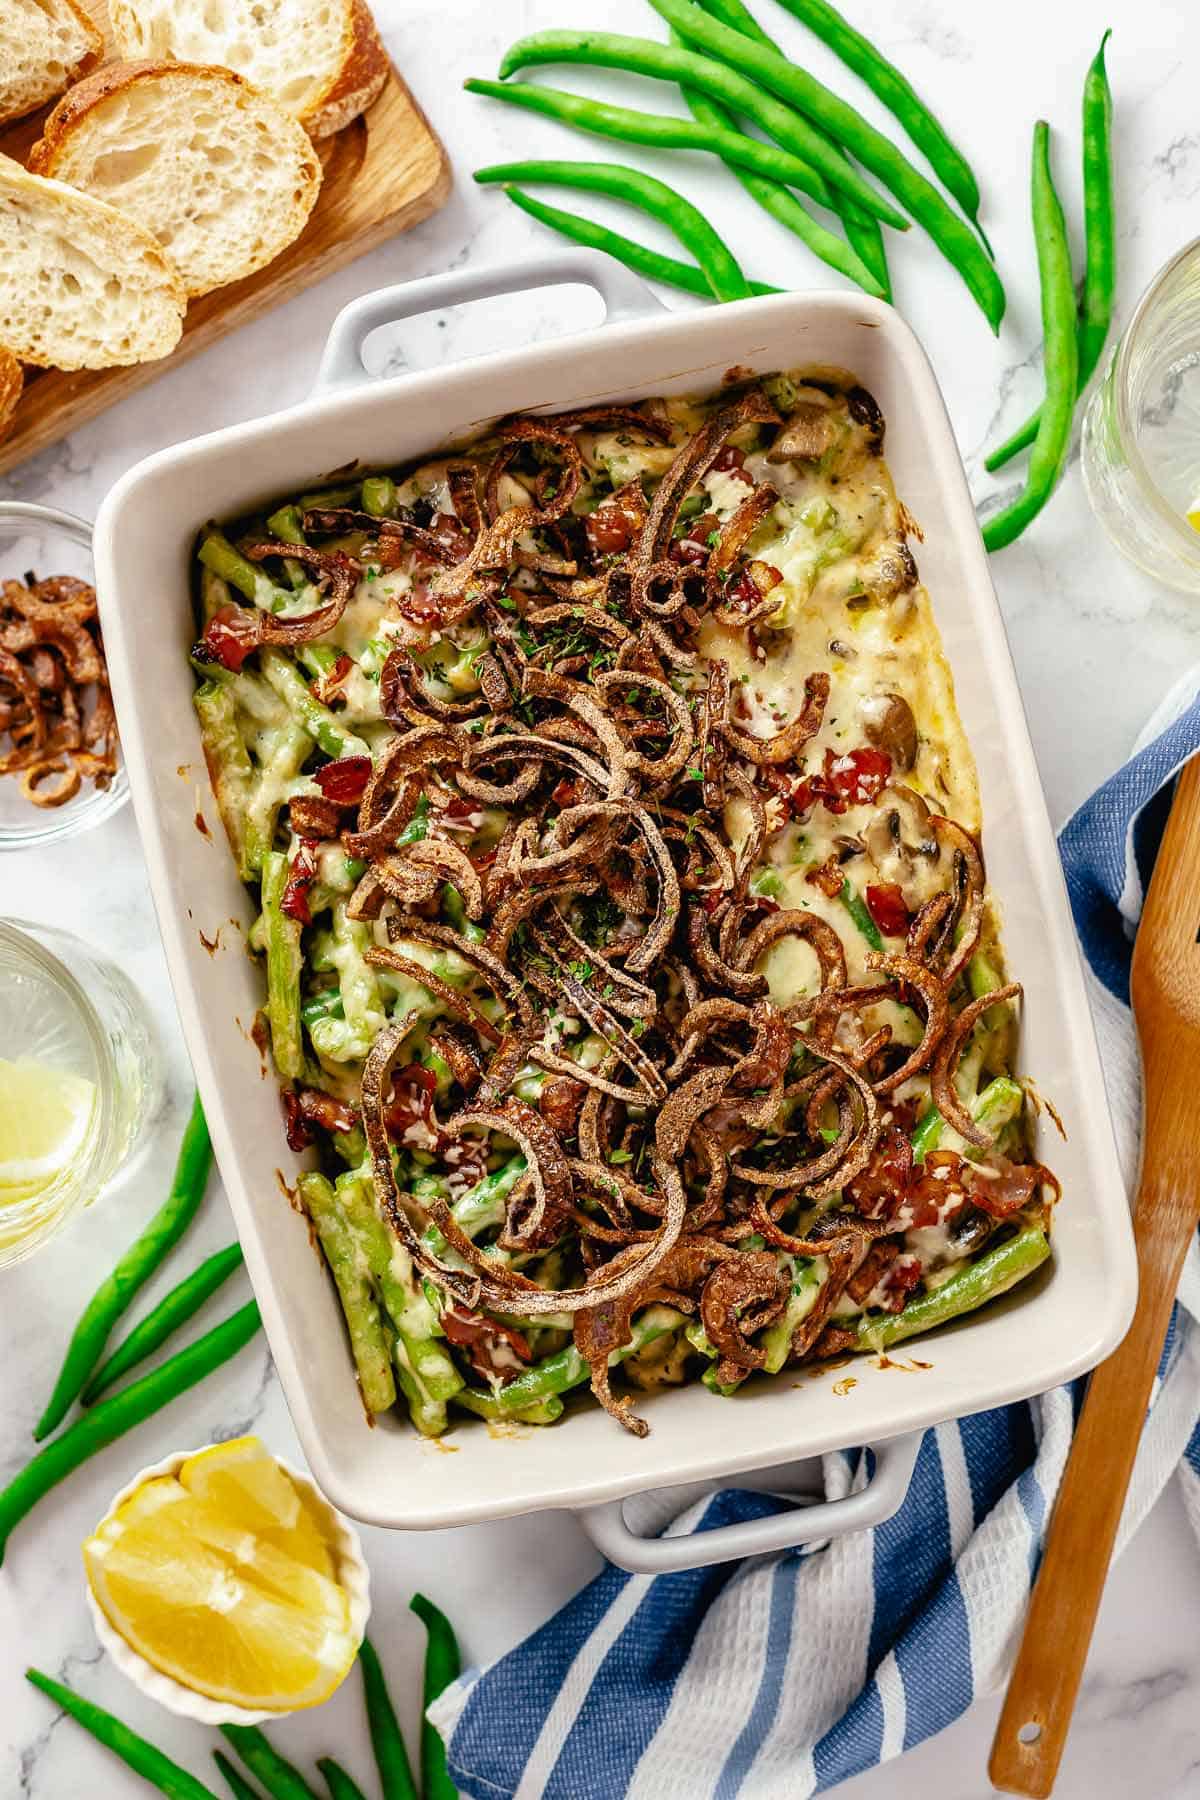 Overhead shot of a baked green bean casserole with bacon on a marble table with lemon slices, scattered green beans, bread and crispy red onions.